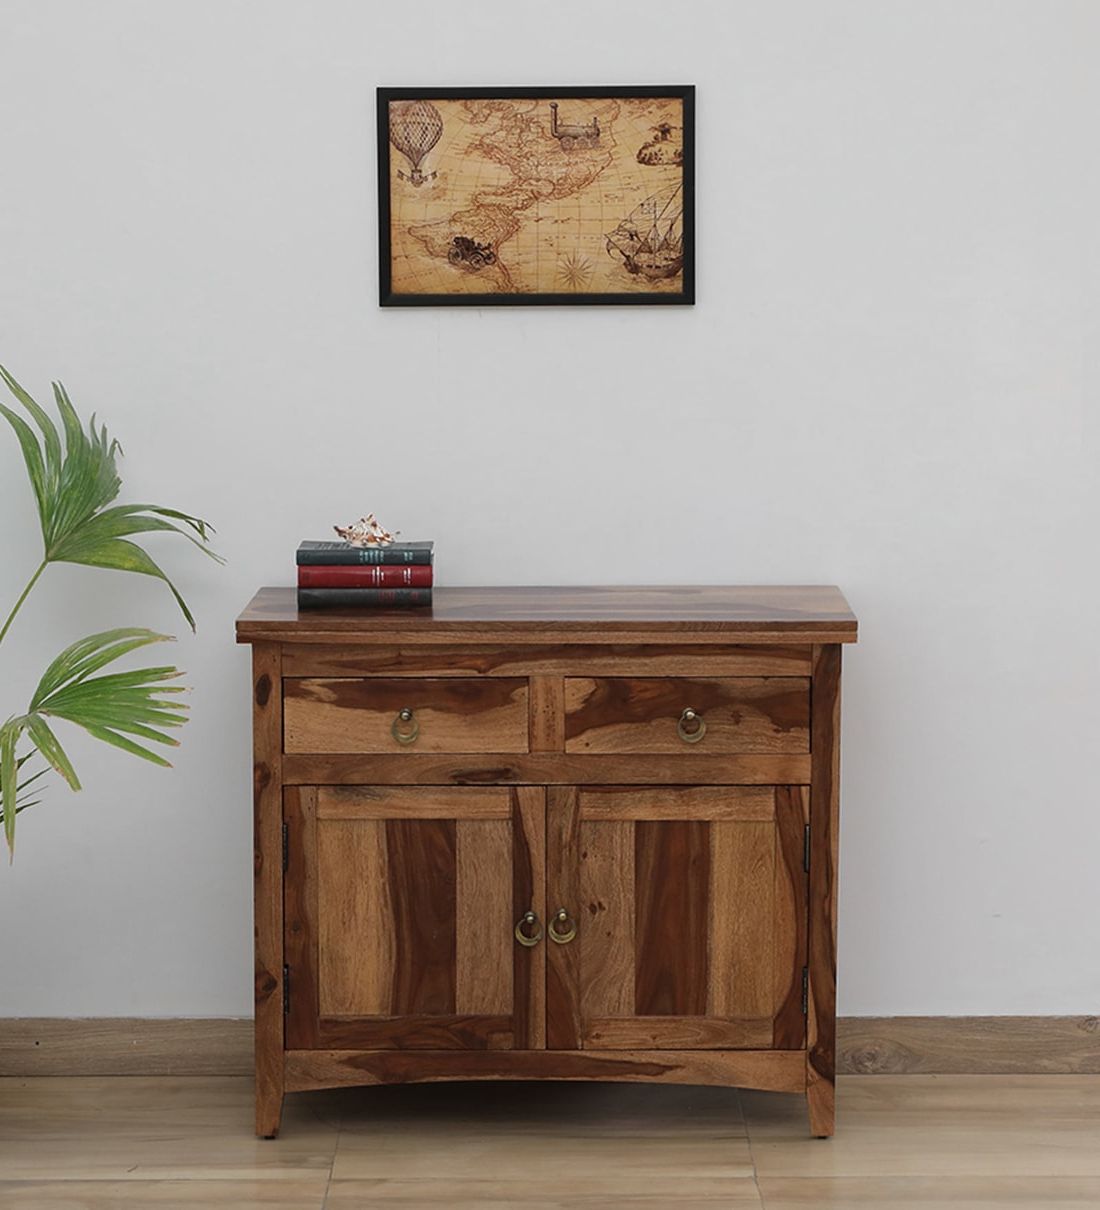 [%buy Biscay Sheesham Wood Sideboard In Scratch Resistant Rustic Teak Finish  At 2% Offwoodsworth From Pepperfry | Pepperfry Within Well Known Sideboards With Breathable Mesh Doors|sideboards With Breathable Mesh Doors Pertaining To Best And Newest Buy Biscay Sheesham Wood Sideboard In Scratch Resistant Rustic Teak Finish  At 2% Offwoodsworth From Pepperfry | Pepperfry|widely Used Sideboards With Breathable Mesh Doors Regarding Buy Biscay Sheesham Wood Sideboard In Scratch Resistant Rustic Teak Finish  At 2% Offwoodsworth From Pepperfry | Pepperfry|widely Used Buy Biscay Sheesham Wood Sideboard In Scratch Resistant Rustic Teak Finish  At 2% Offwoodsworth From Pepperfry | Pepperfry Inside Sideboards With Breathable Mesh Doors%] (Photo 6 of 15)